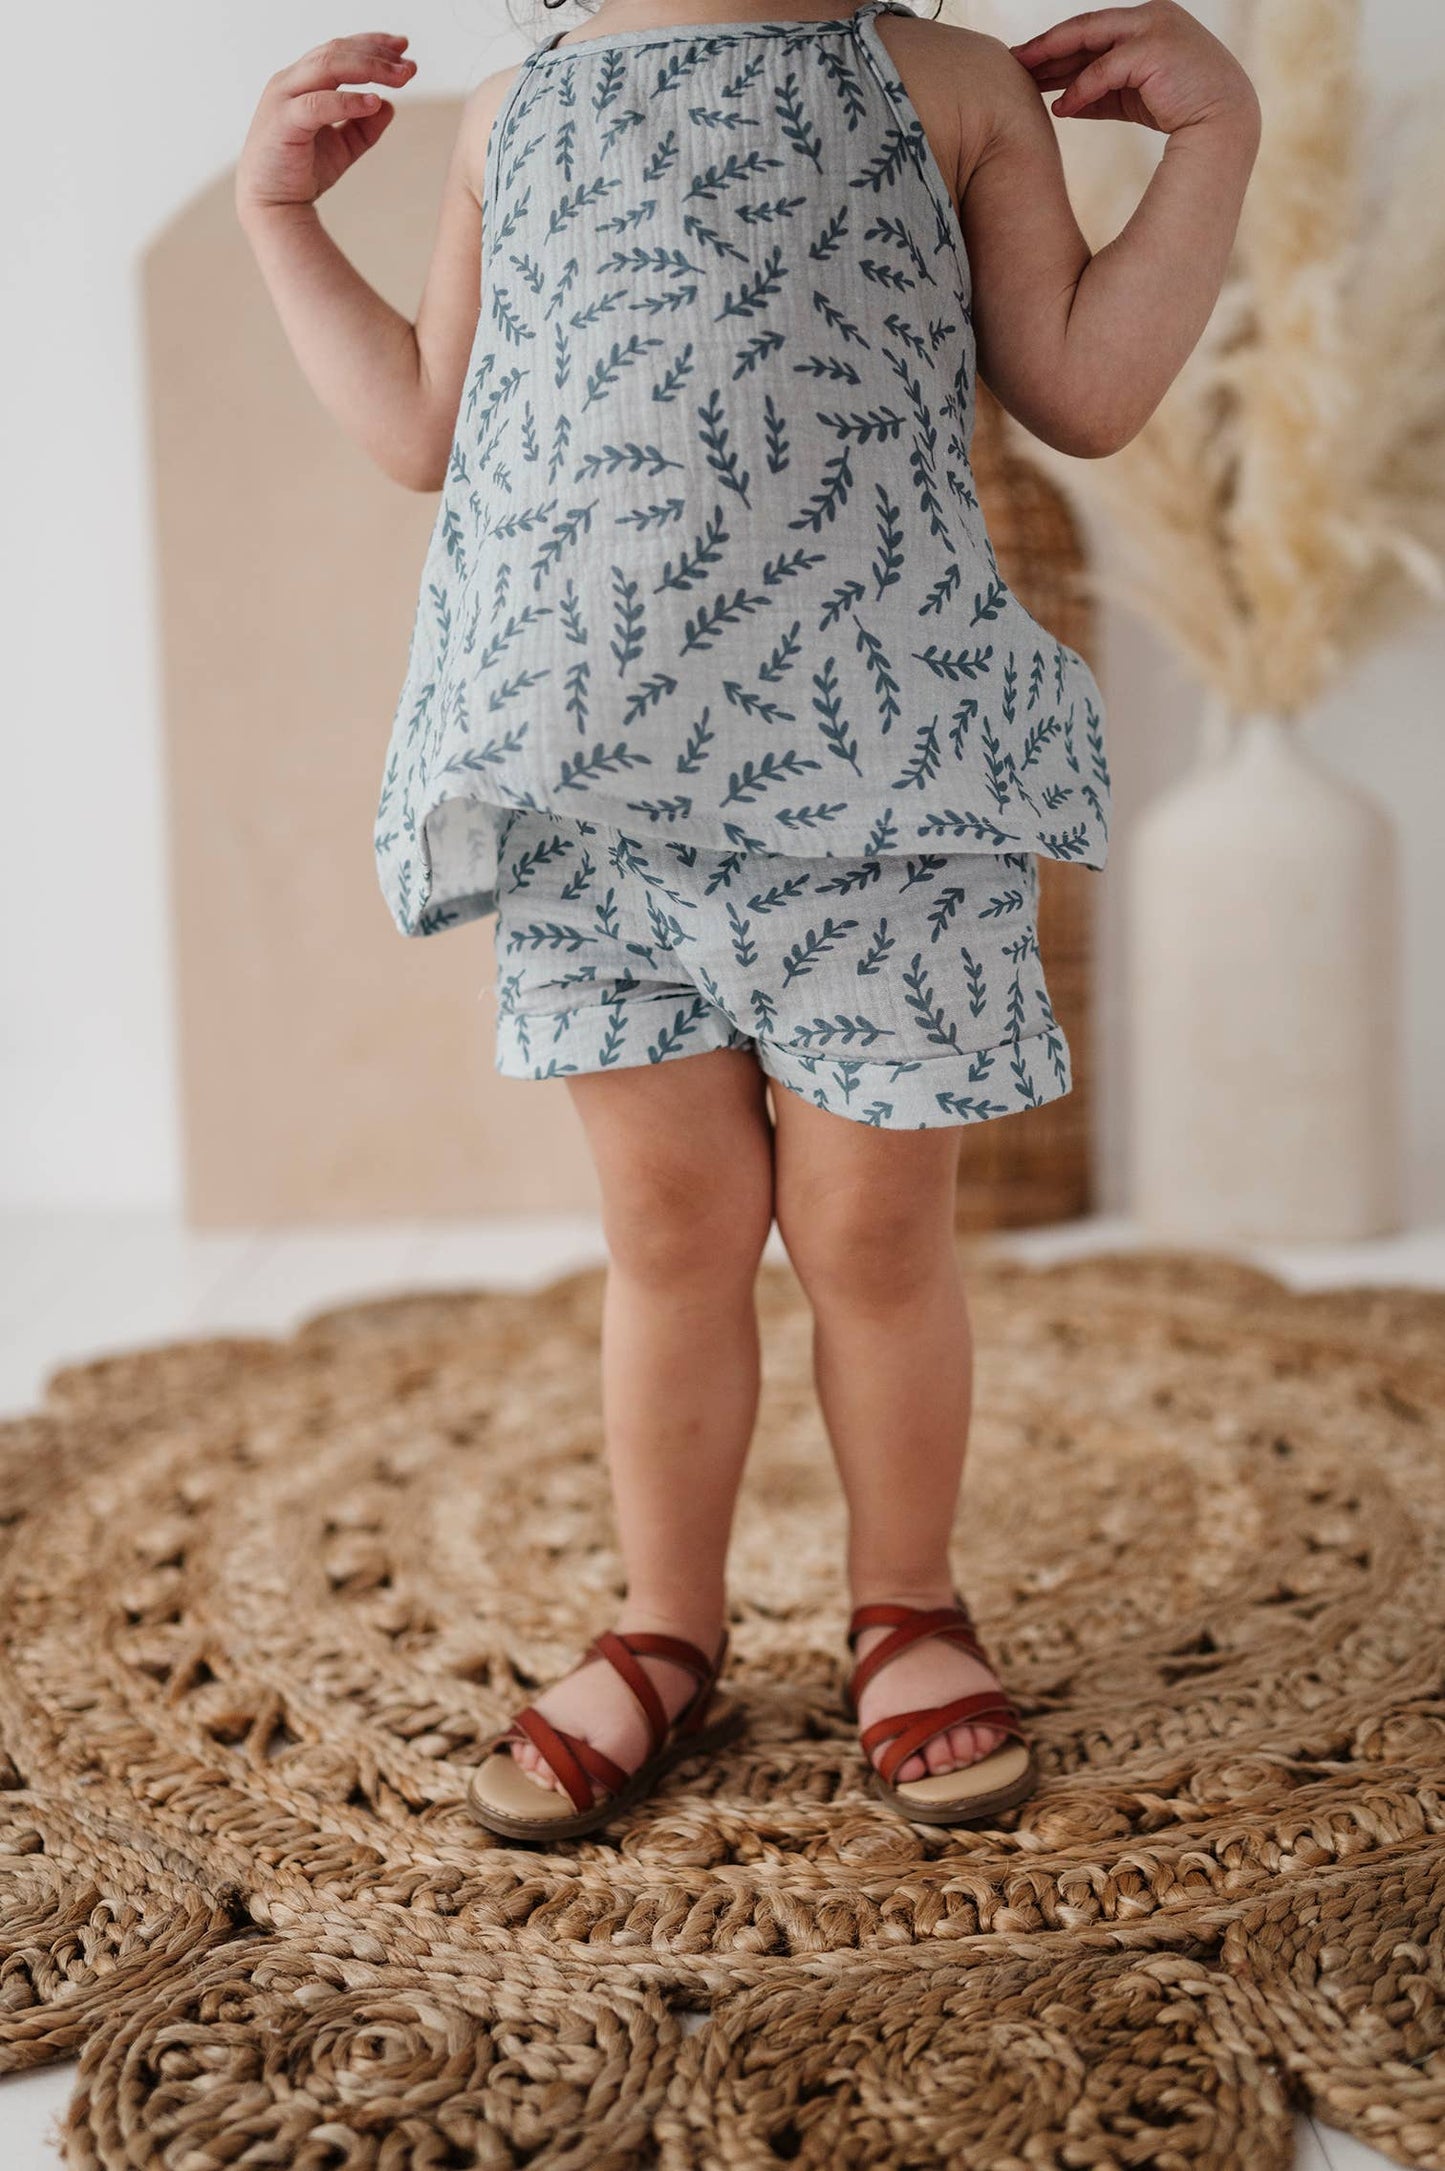 babysprouts clothing company - Gauze Tank & Short Set in Herb